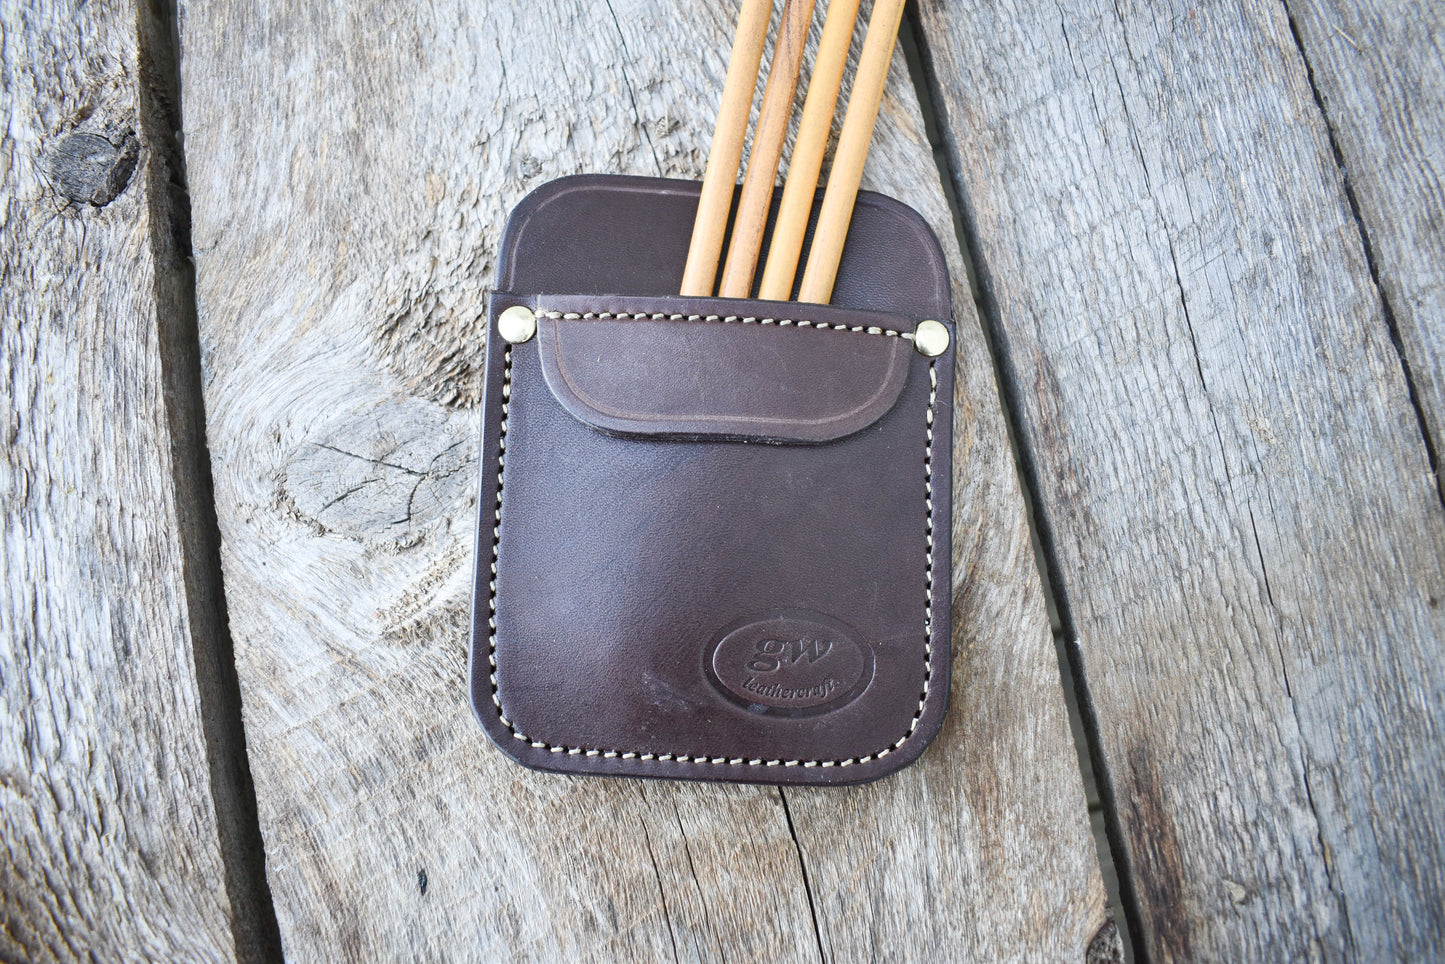 Leather POCKET Quiver, Archery Quiver, Arrow Quiver is quick and easy